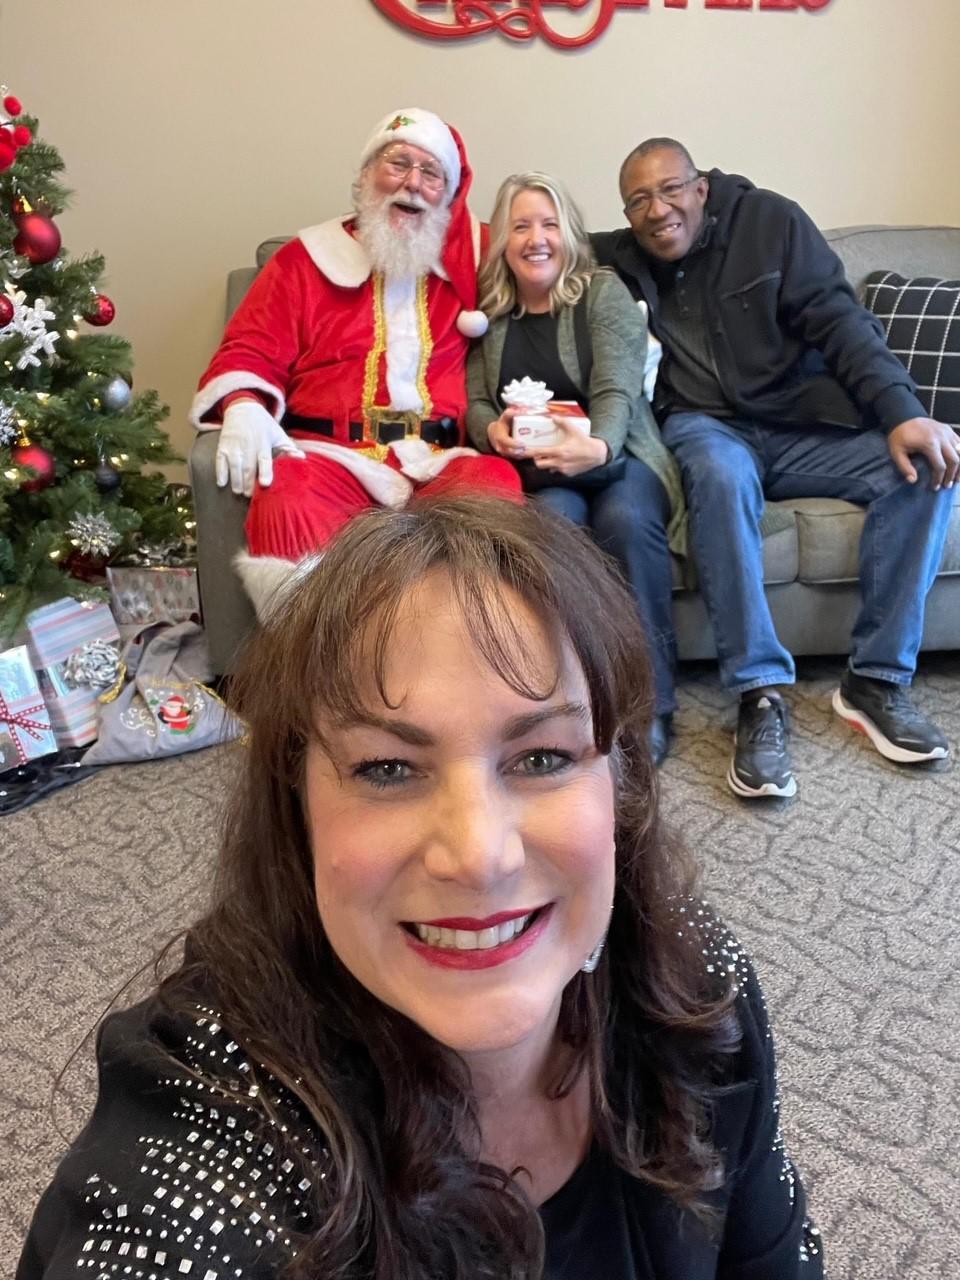 Had a great time this weekend at The McCabe Real Estate Group holiday event- Thanks for hosting a fun event Leslie, Todd and Team!